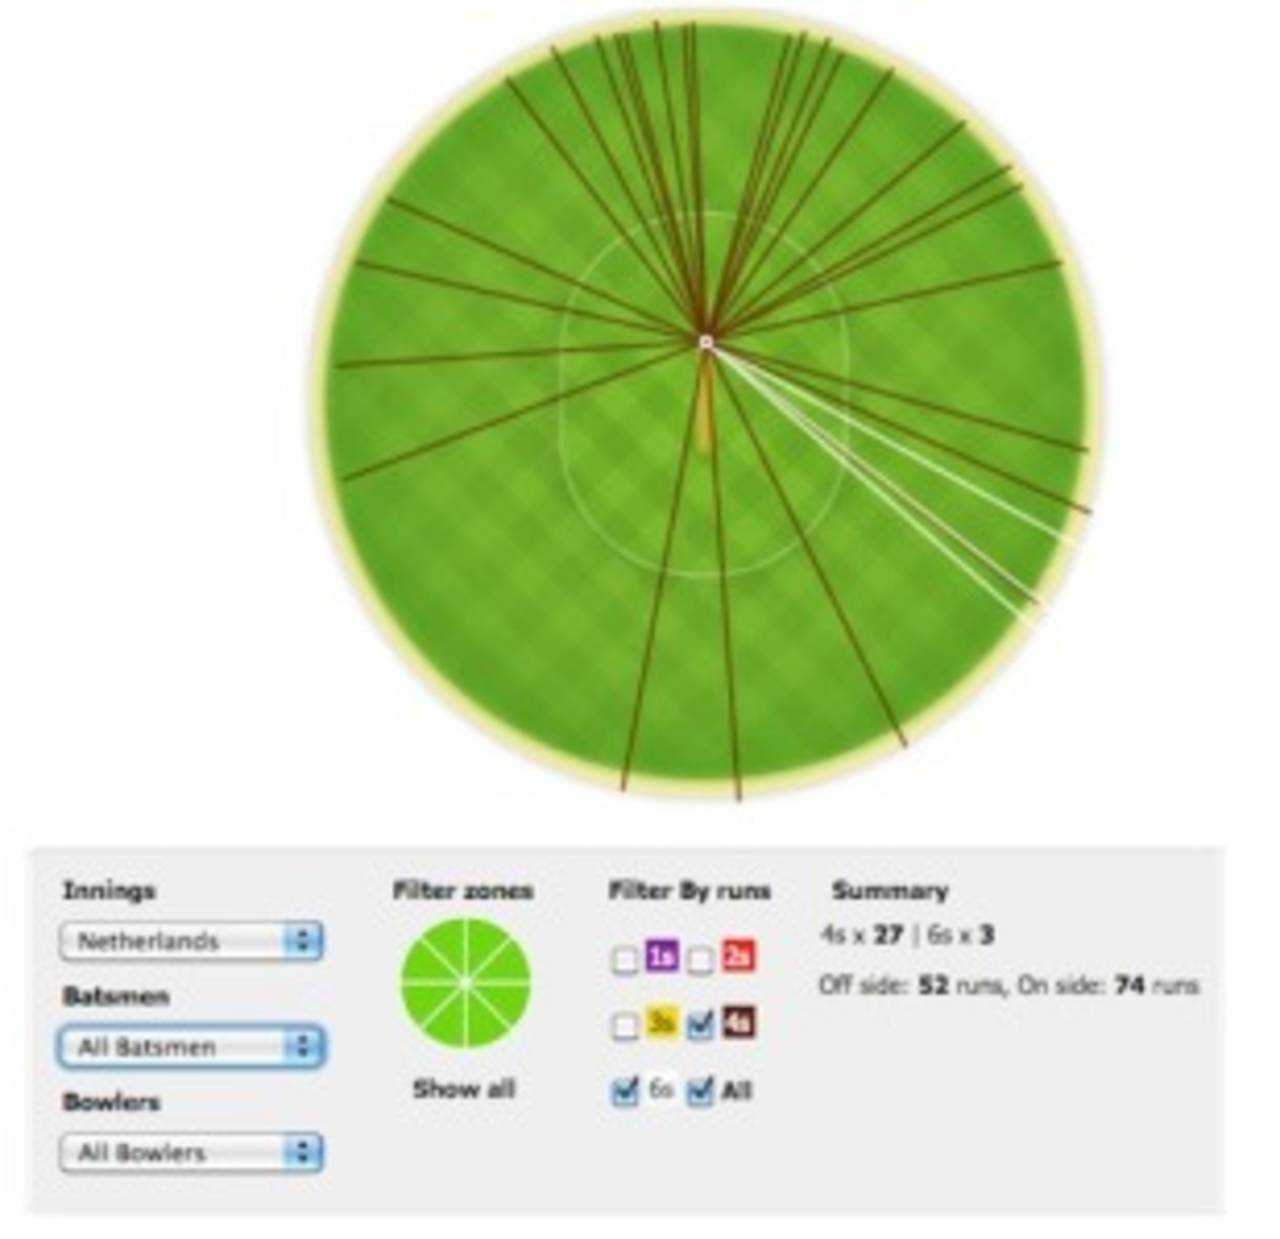 The wagon-wheel of boundaries in Netherlands' innings shows that the majority of their fours were scored behind the wicket (<a href="/ci/content/image/502494.html" target="_blank">Click here</a> for the enlarged image, and check the scorecard for more graphs.)&nbsp;&nbsp;&bull;&nbsp;&nbsp;ESPNcricinfo Ltd